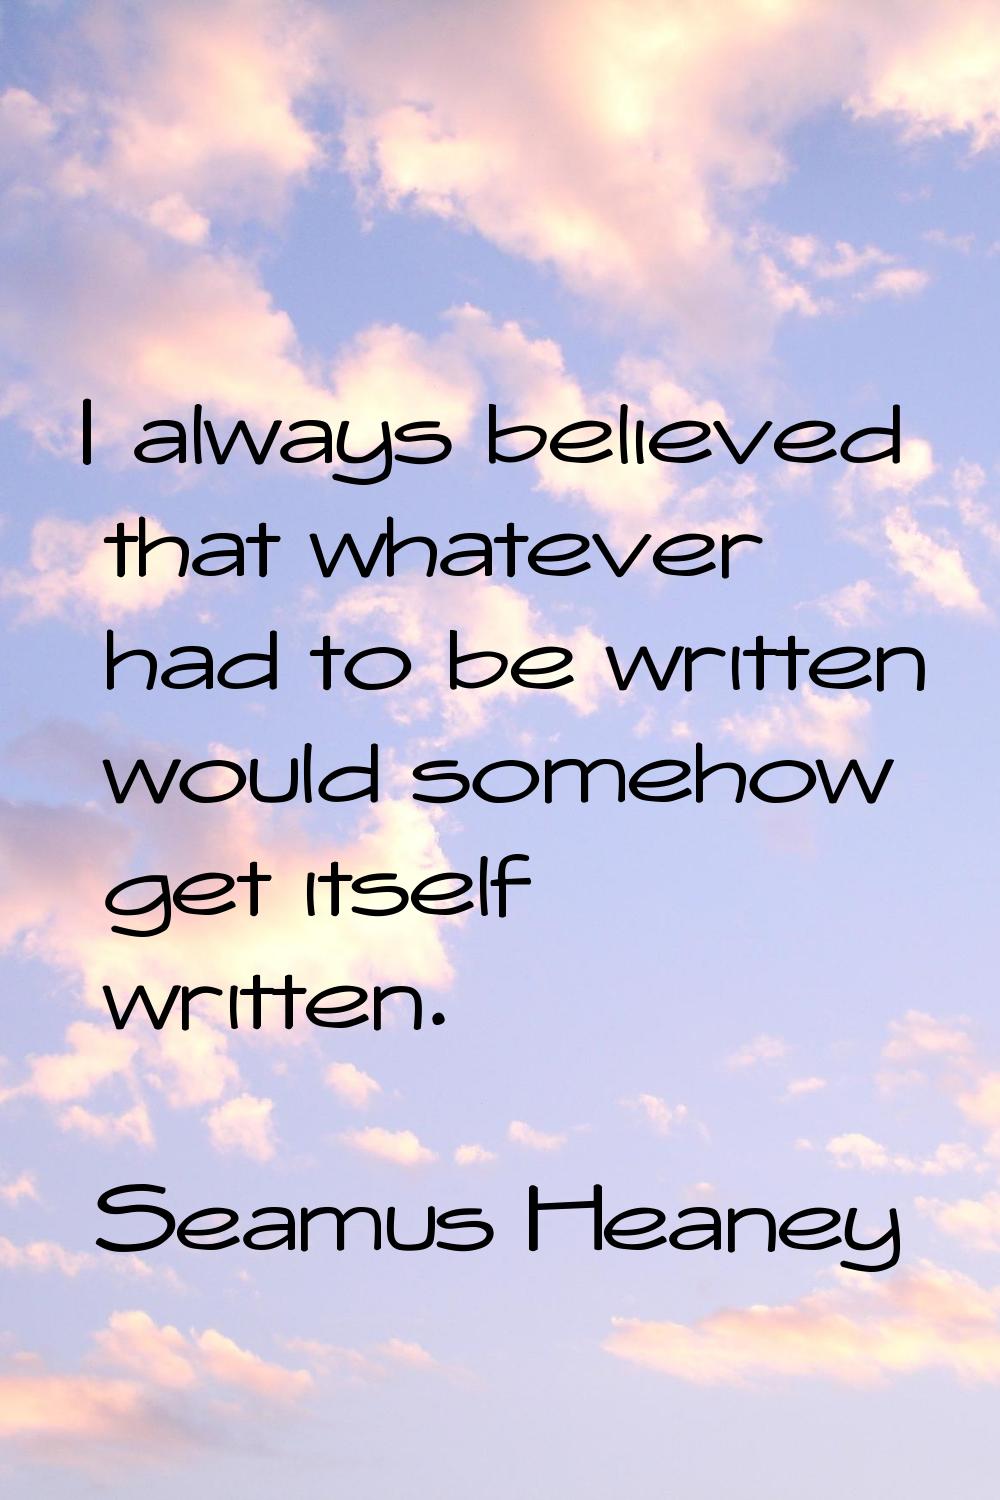 I always believed that whatever had to be written would somehow get itself written.